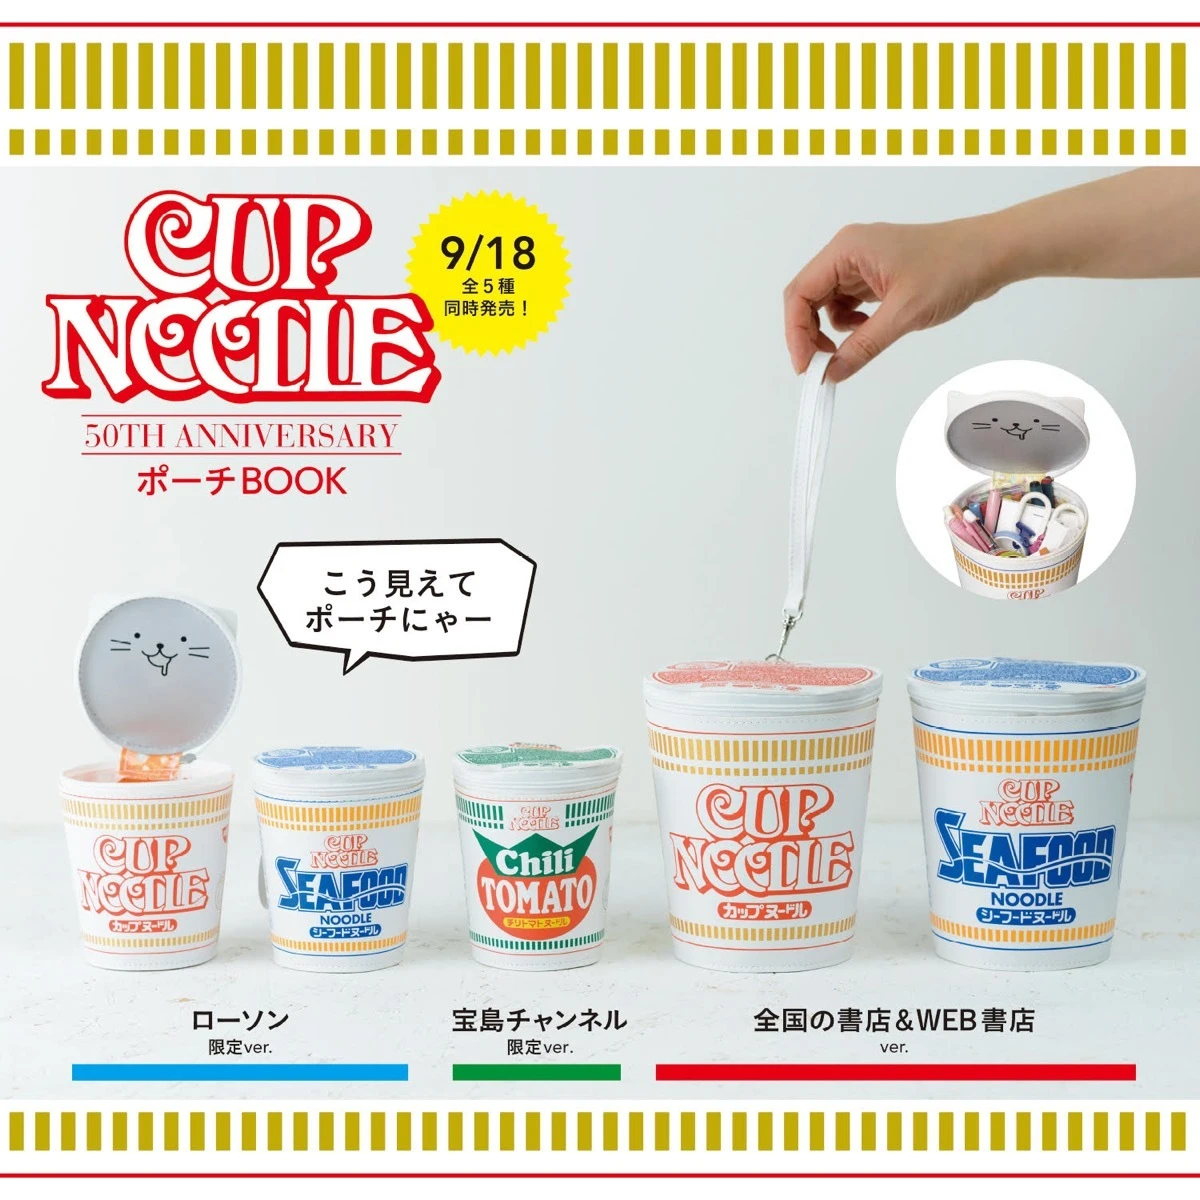 「CUP NOODLE 50TH ANNIVERSARY BOOK」